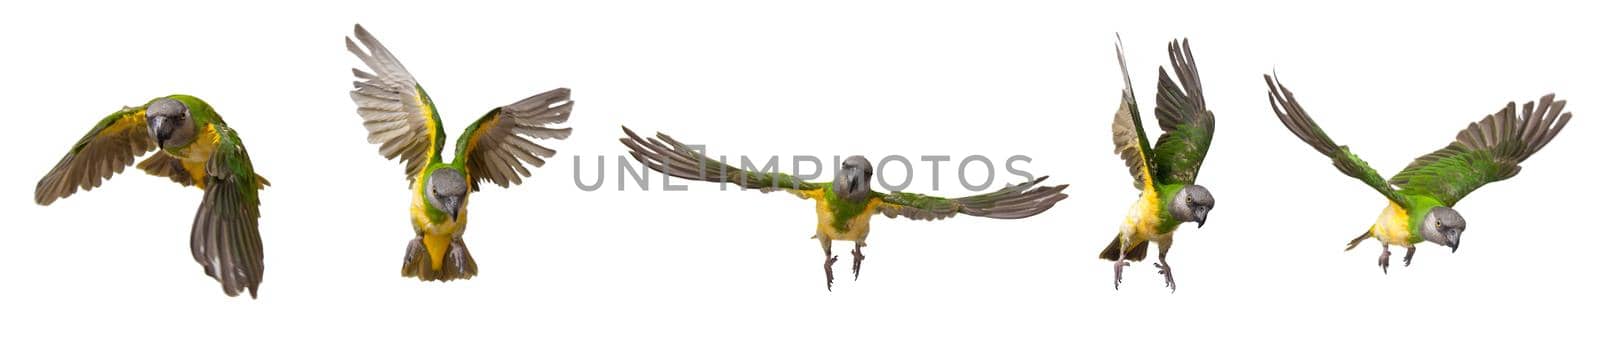 Poicephalus senegalus. Senegal parrot in flight in front of a white background. photo